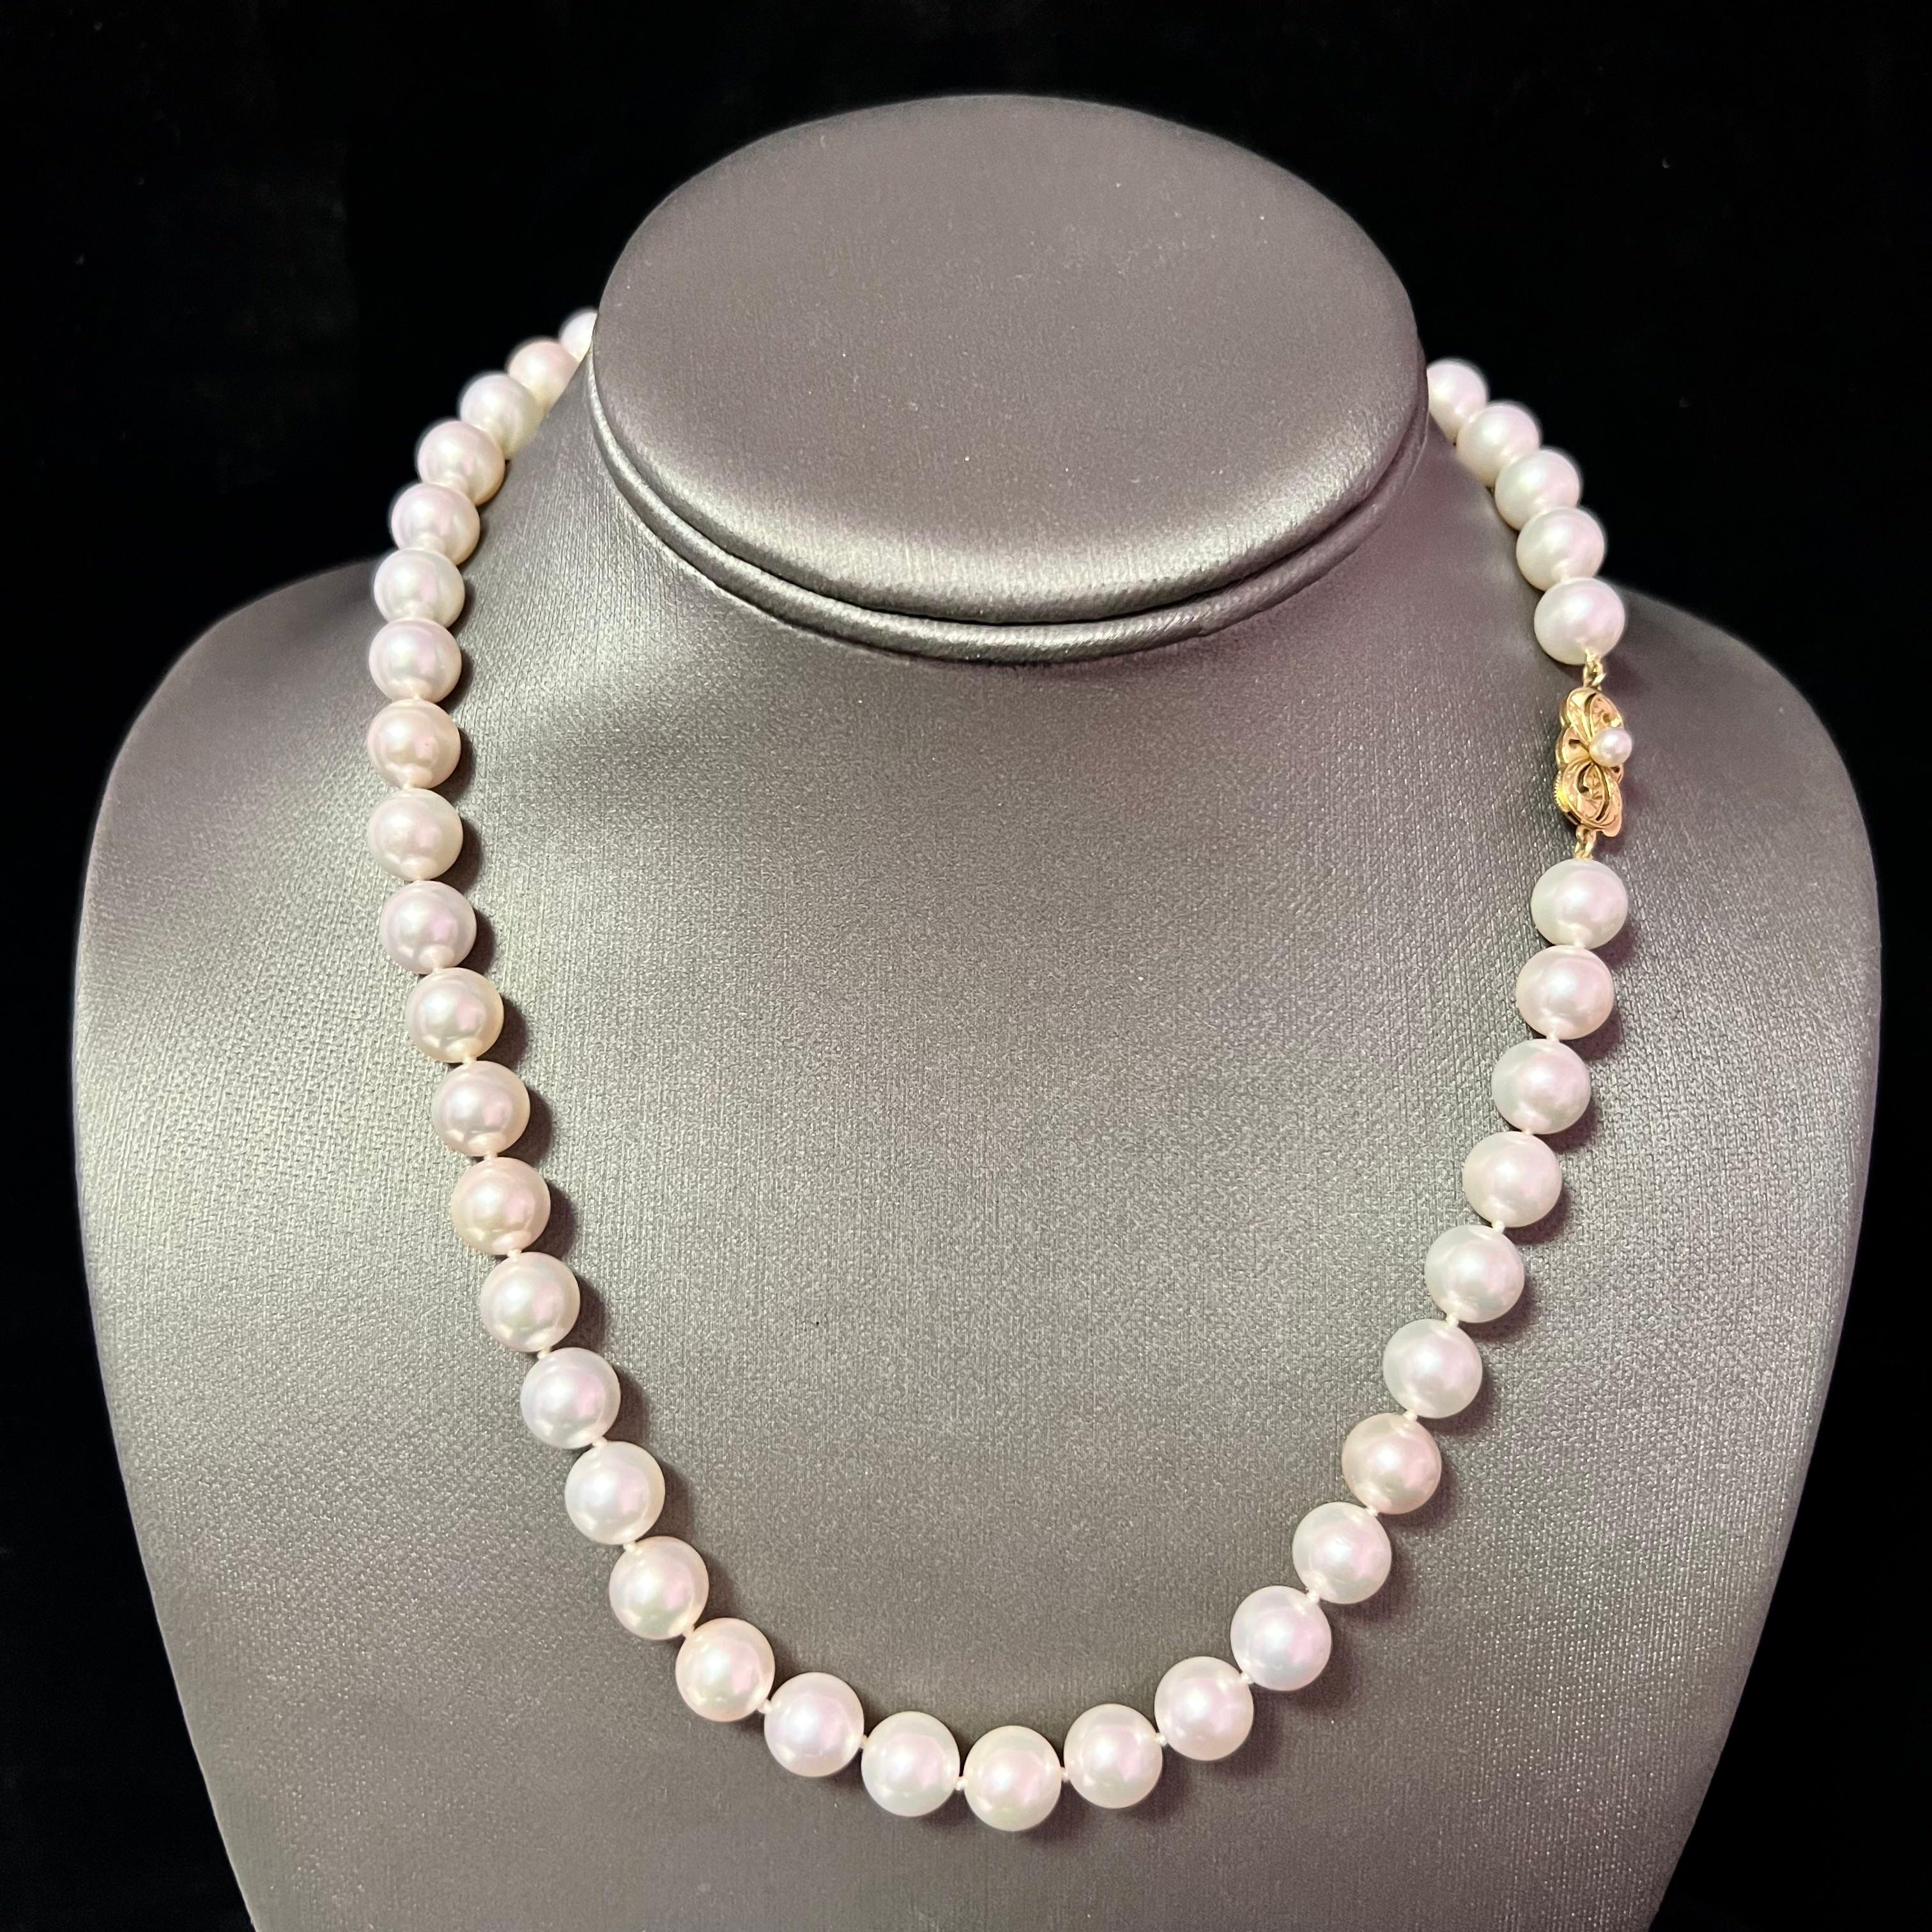 Fine Quality Mikimoto Estate Akoya Pearl Necklace 14k Gold 9 mm AAA Certified $14,950 121280

Nothing says, “I Love you” more than Diamonds and Pearls!

This Akoya pearl necklace has been Certified, Inspected, and Appraised by Gemological Appraisal